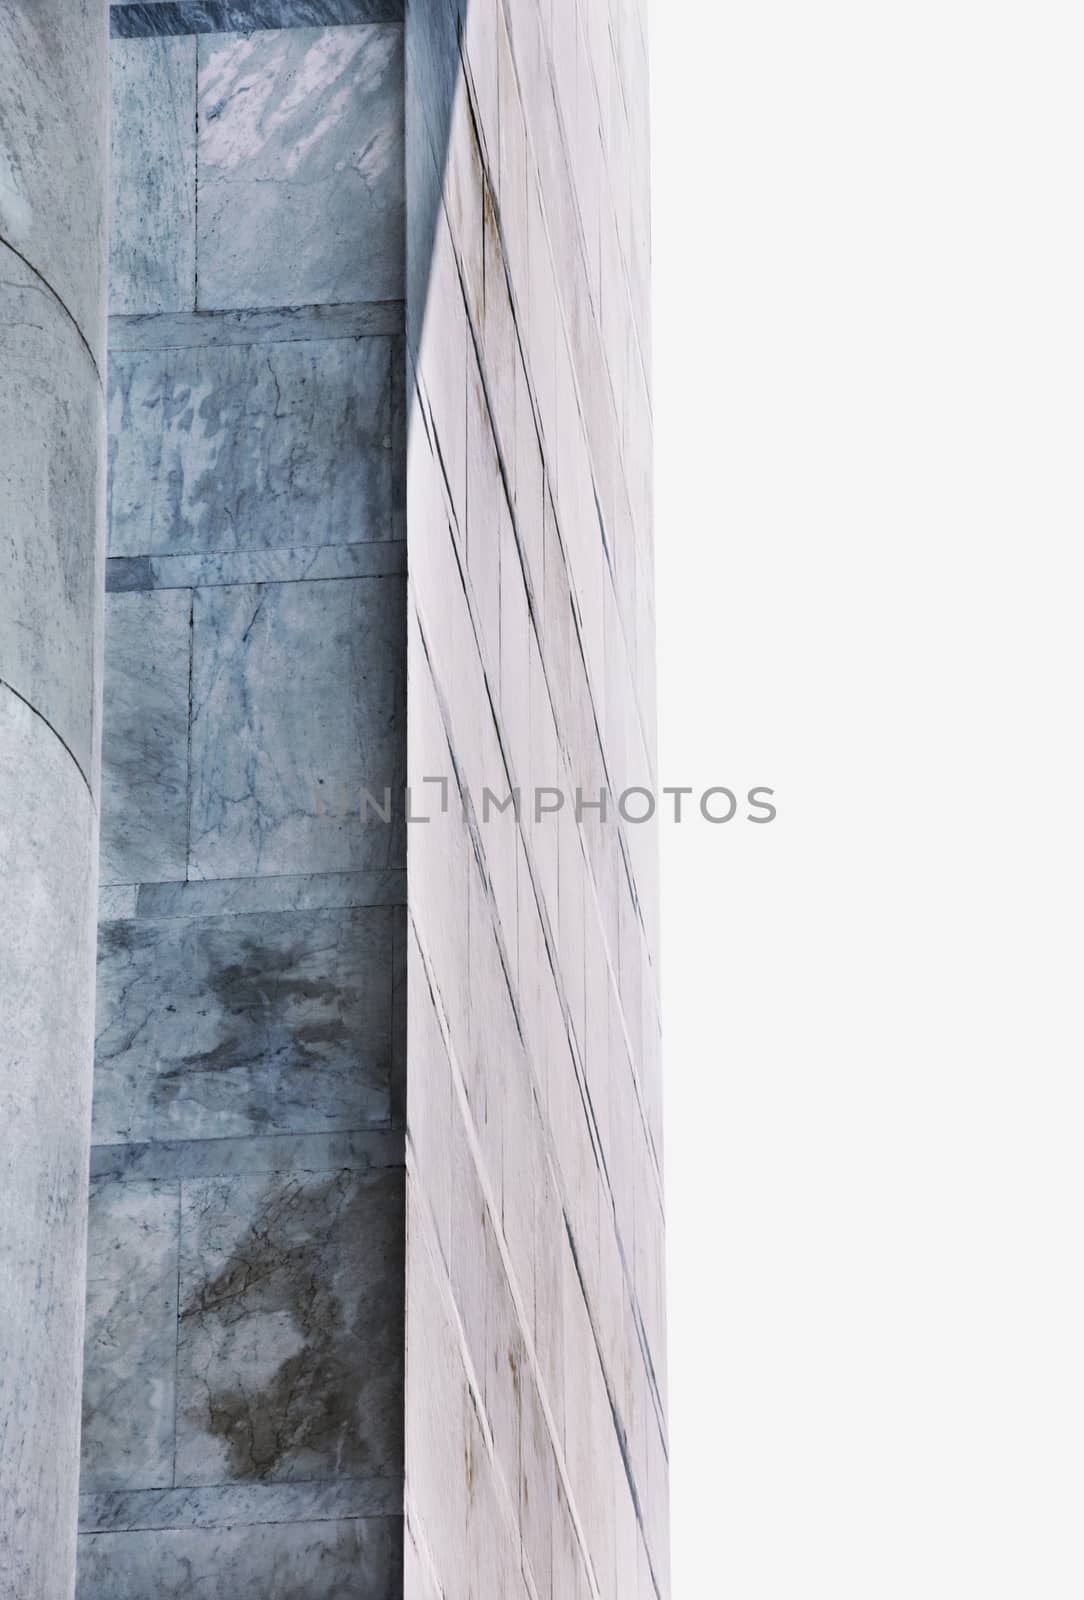  Marble building facade , impressive glimpse view ,vertical composition ,bright marble surface 